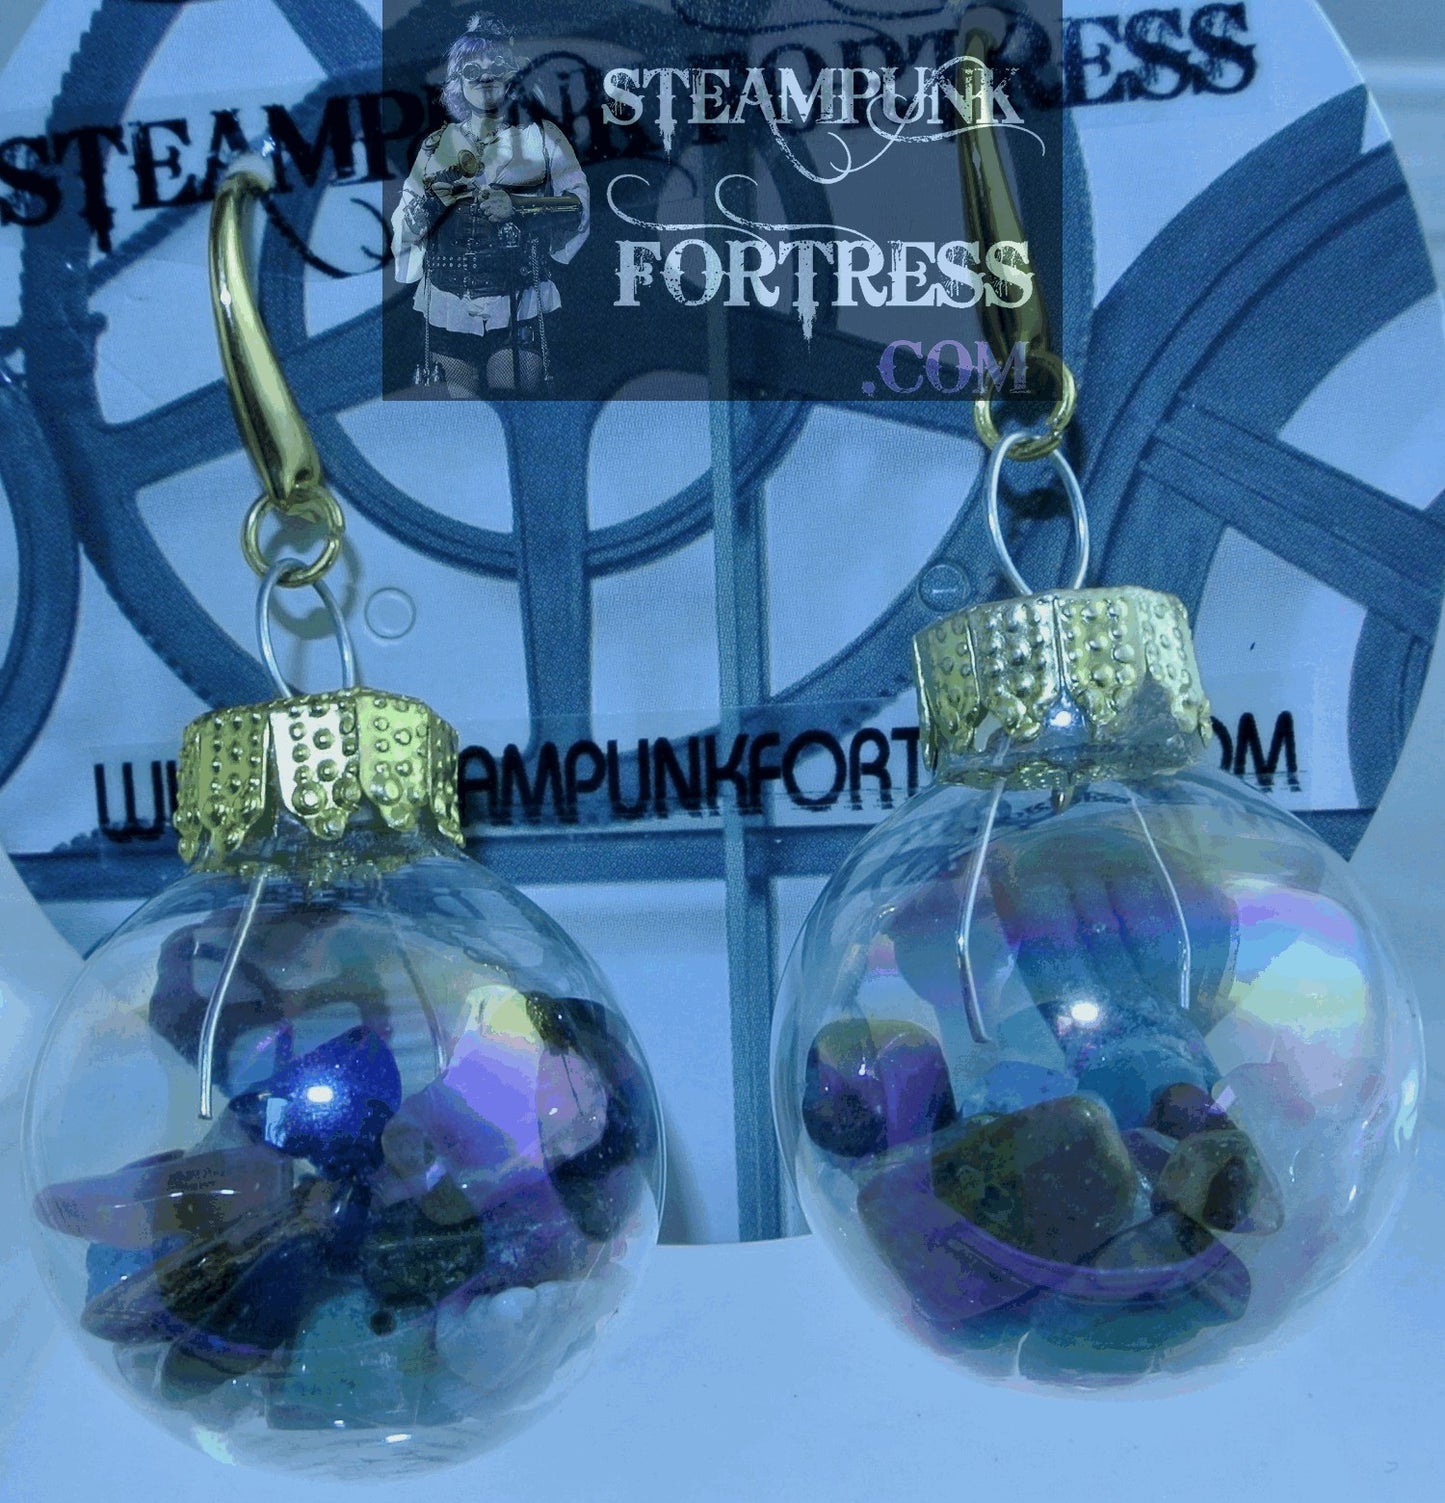 GOLD CHIRSTMAS ORNAMENT GLOBE MIXED GEMSTONES PIERCED EARRINGS GLASS VIAL STARR WILDE STEAMPUNK FORTRESS 